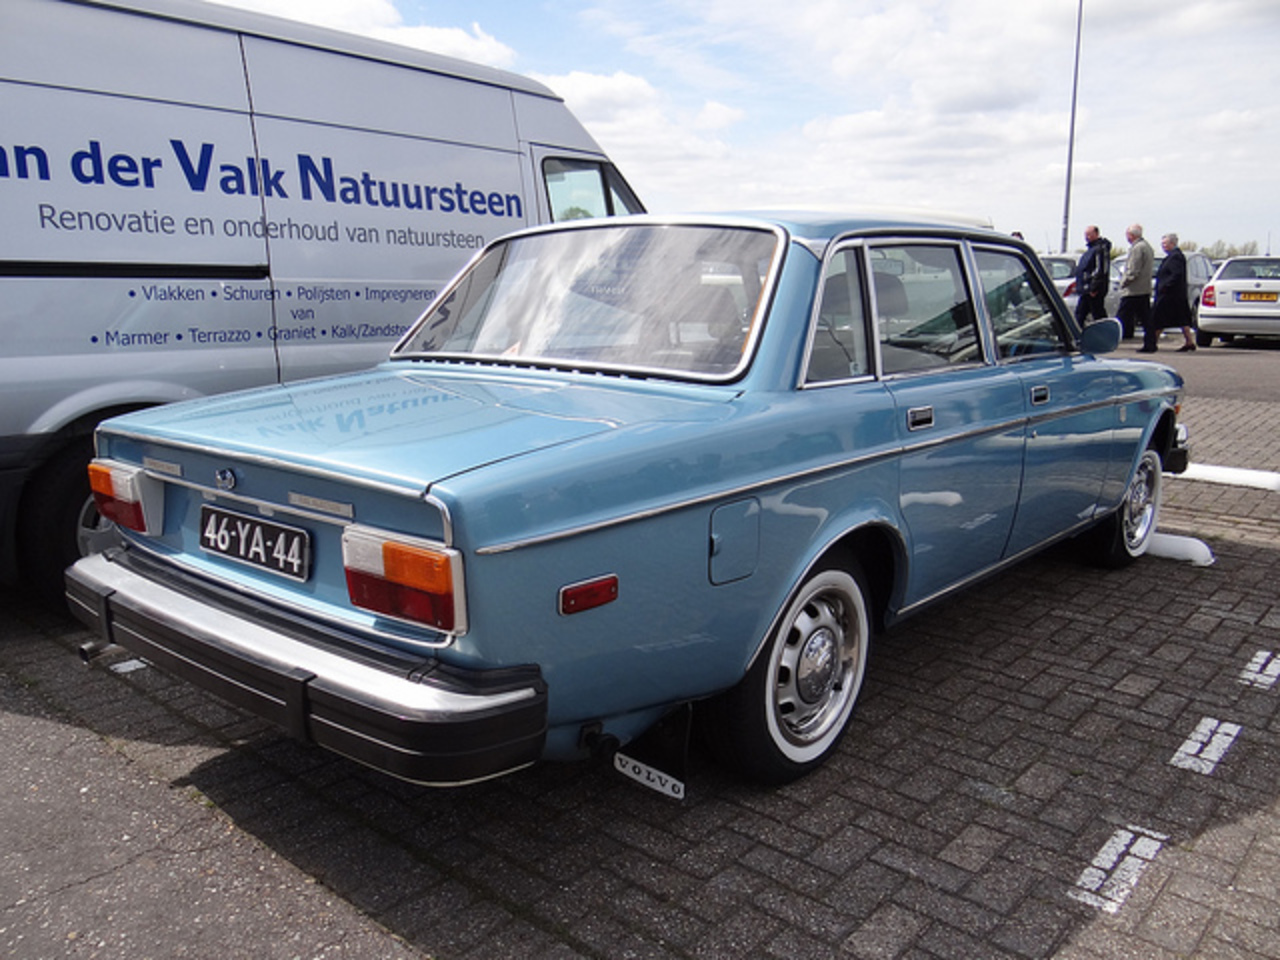 1974 Volvo 164 E (automatic) | Flickr - Photo Sharing!